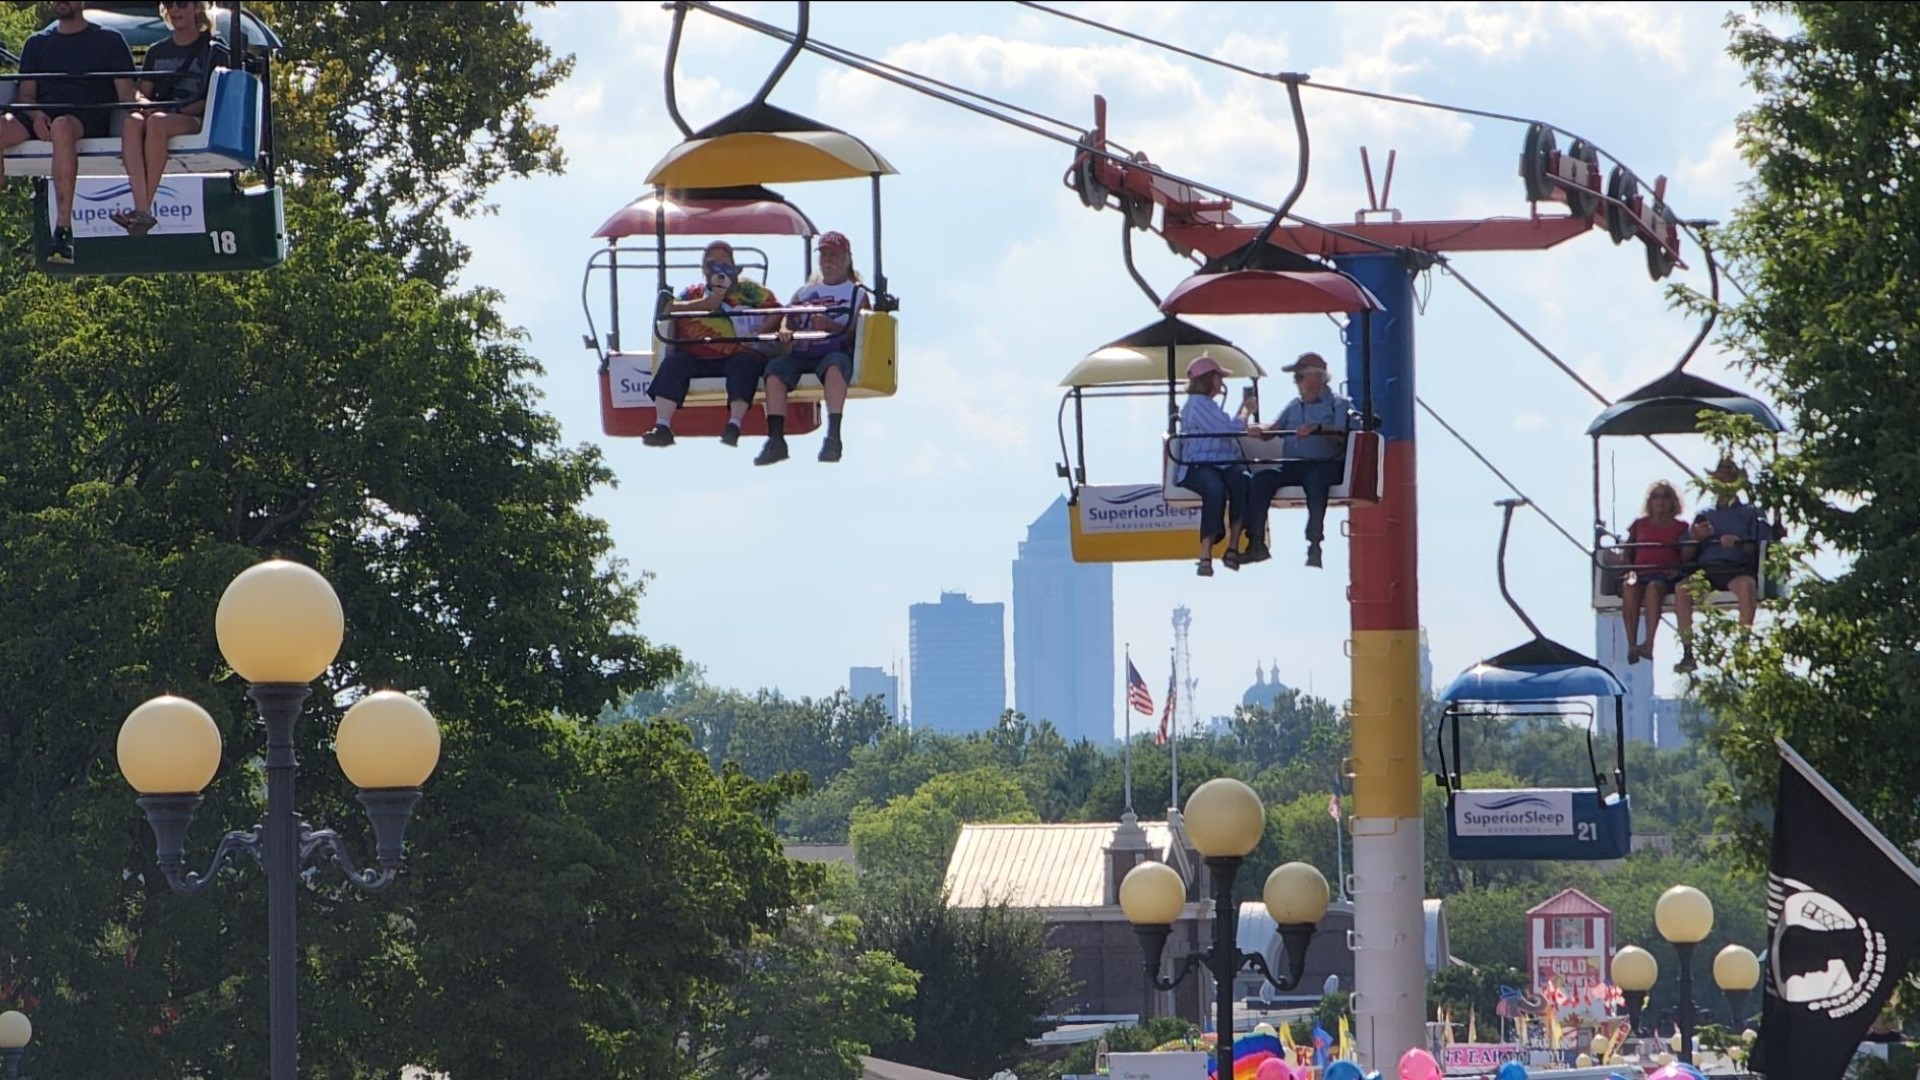 Organizers say they're bringing in some exciting new rides for you and your family.